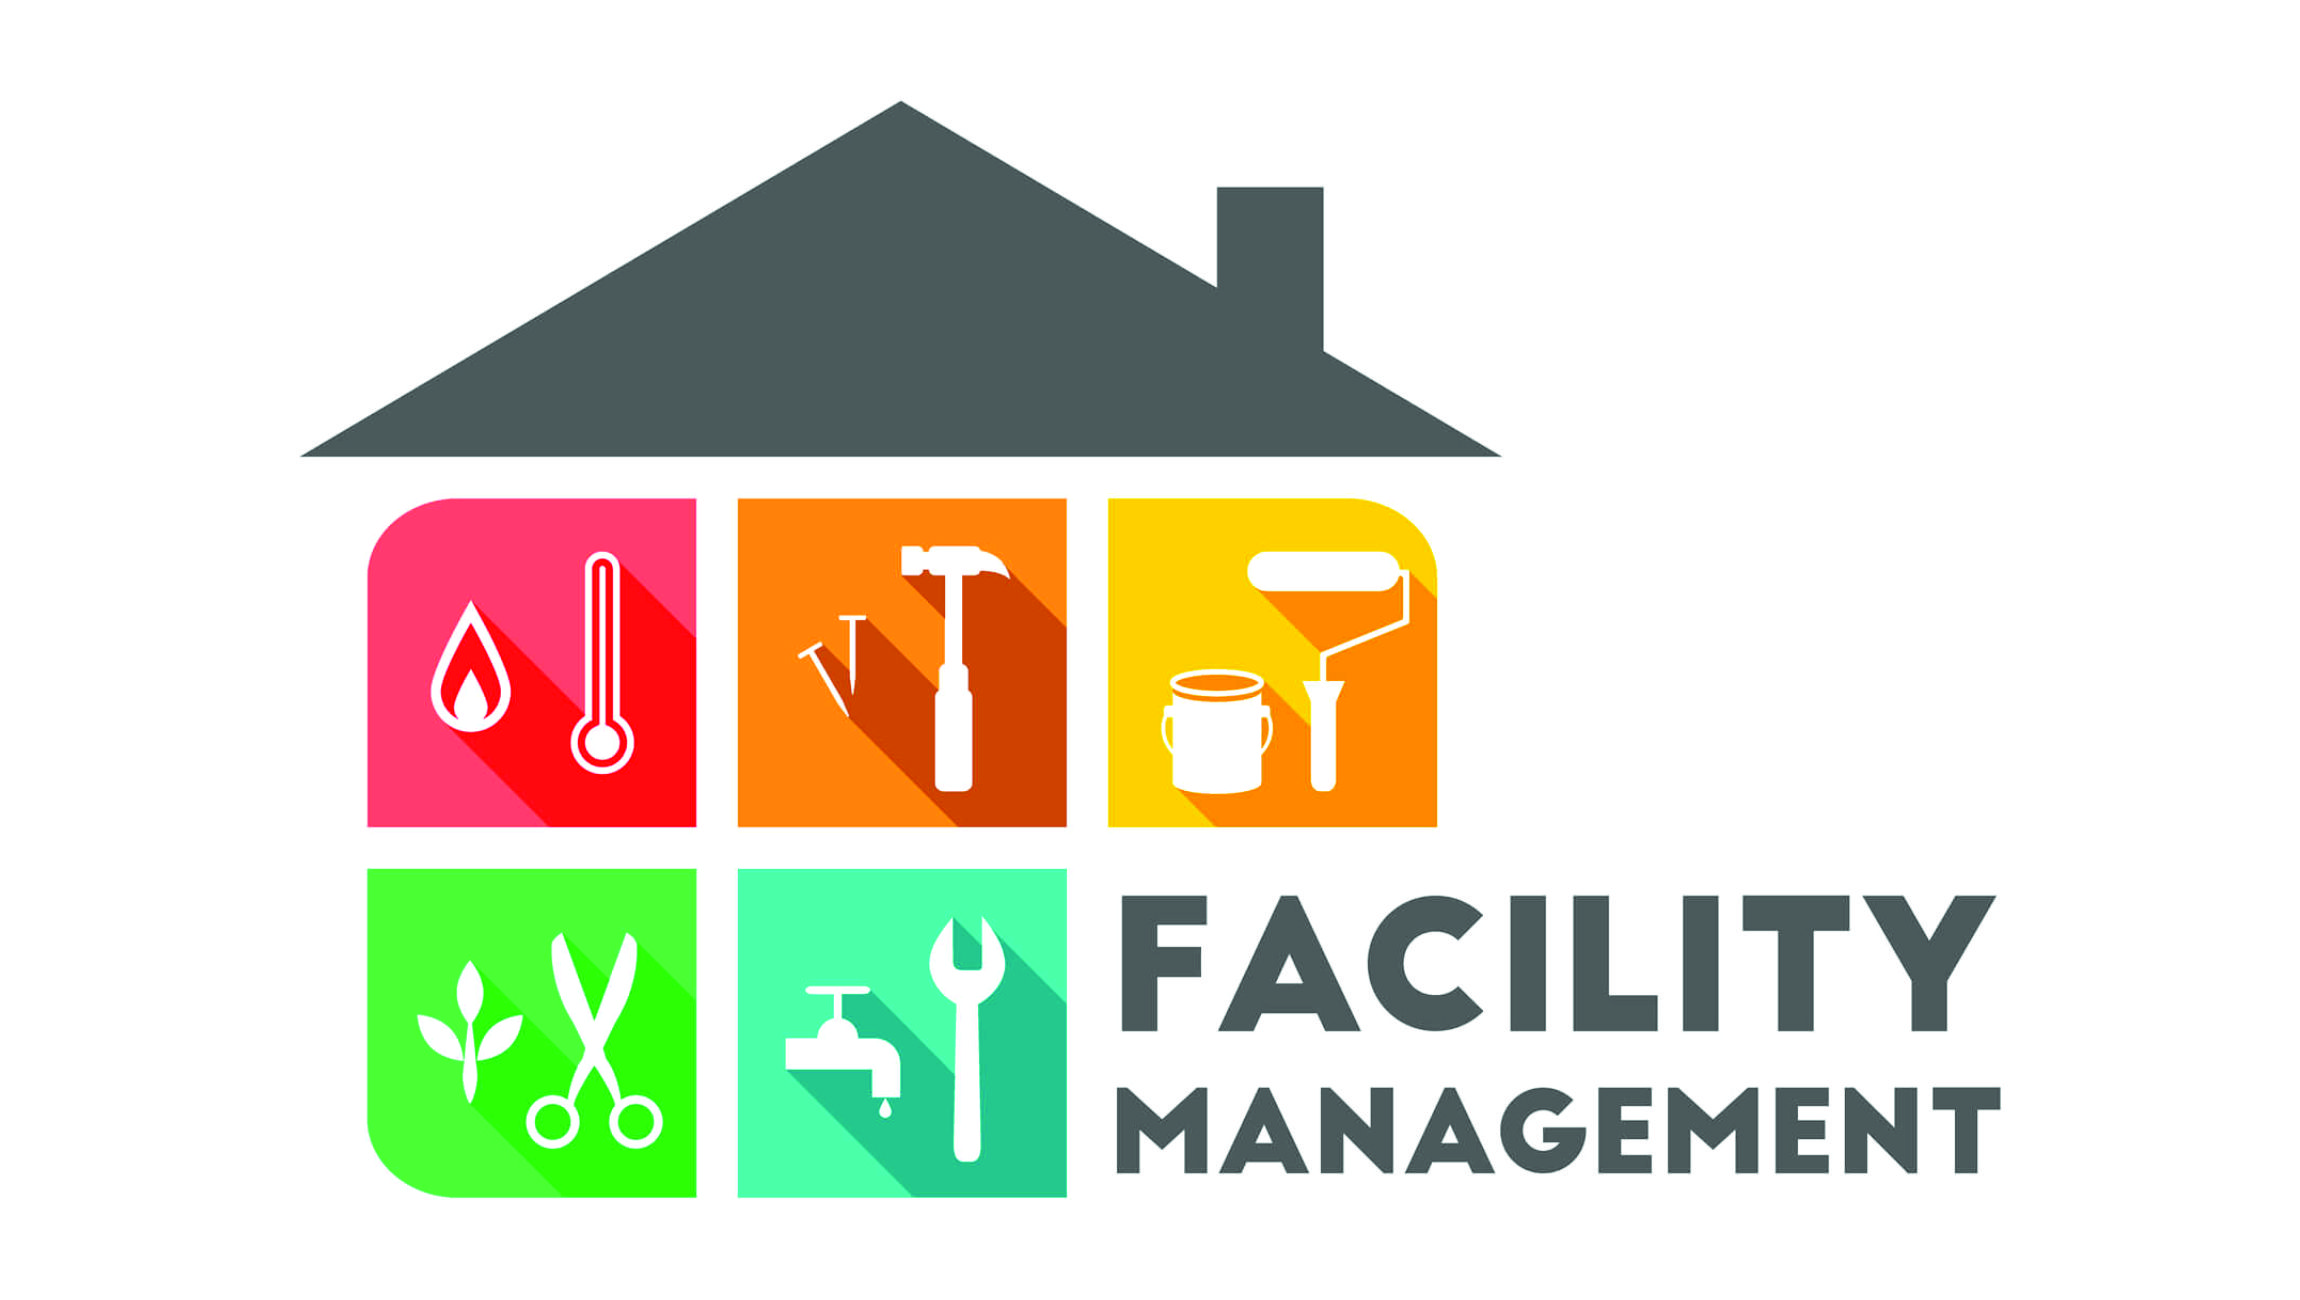  facility management software